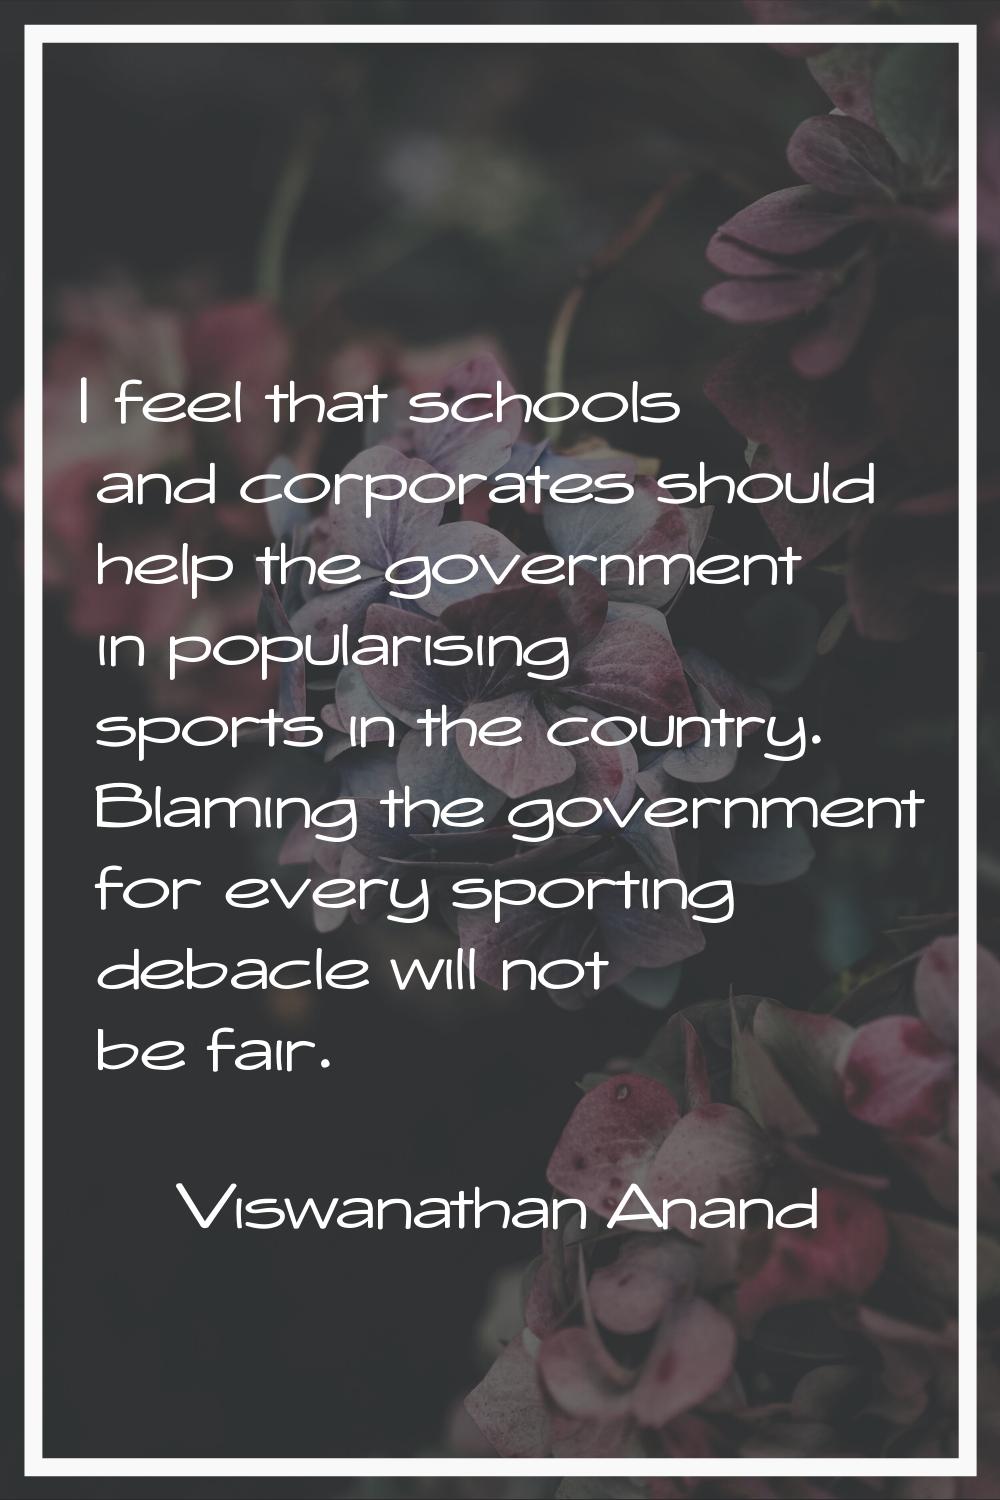 I feel that schools and corporates should help the government in popularising sports in the country